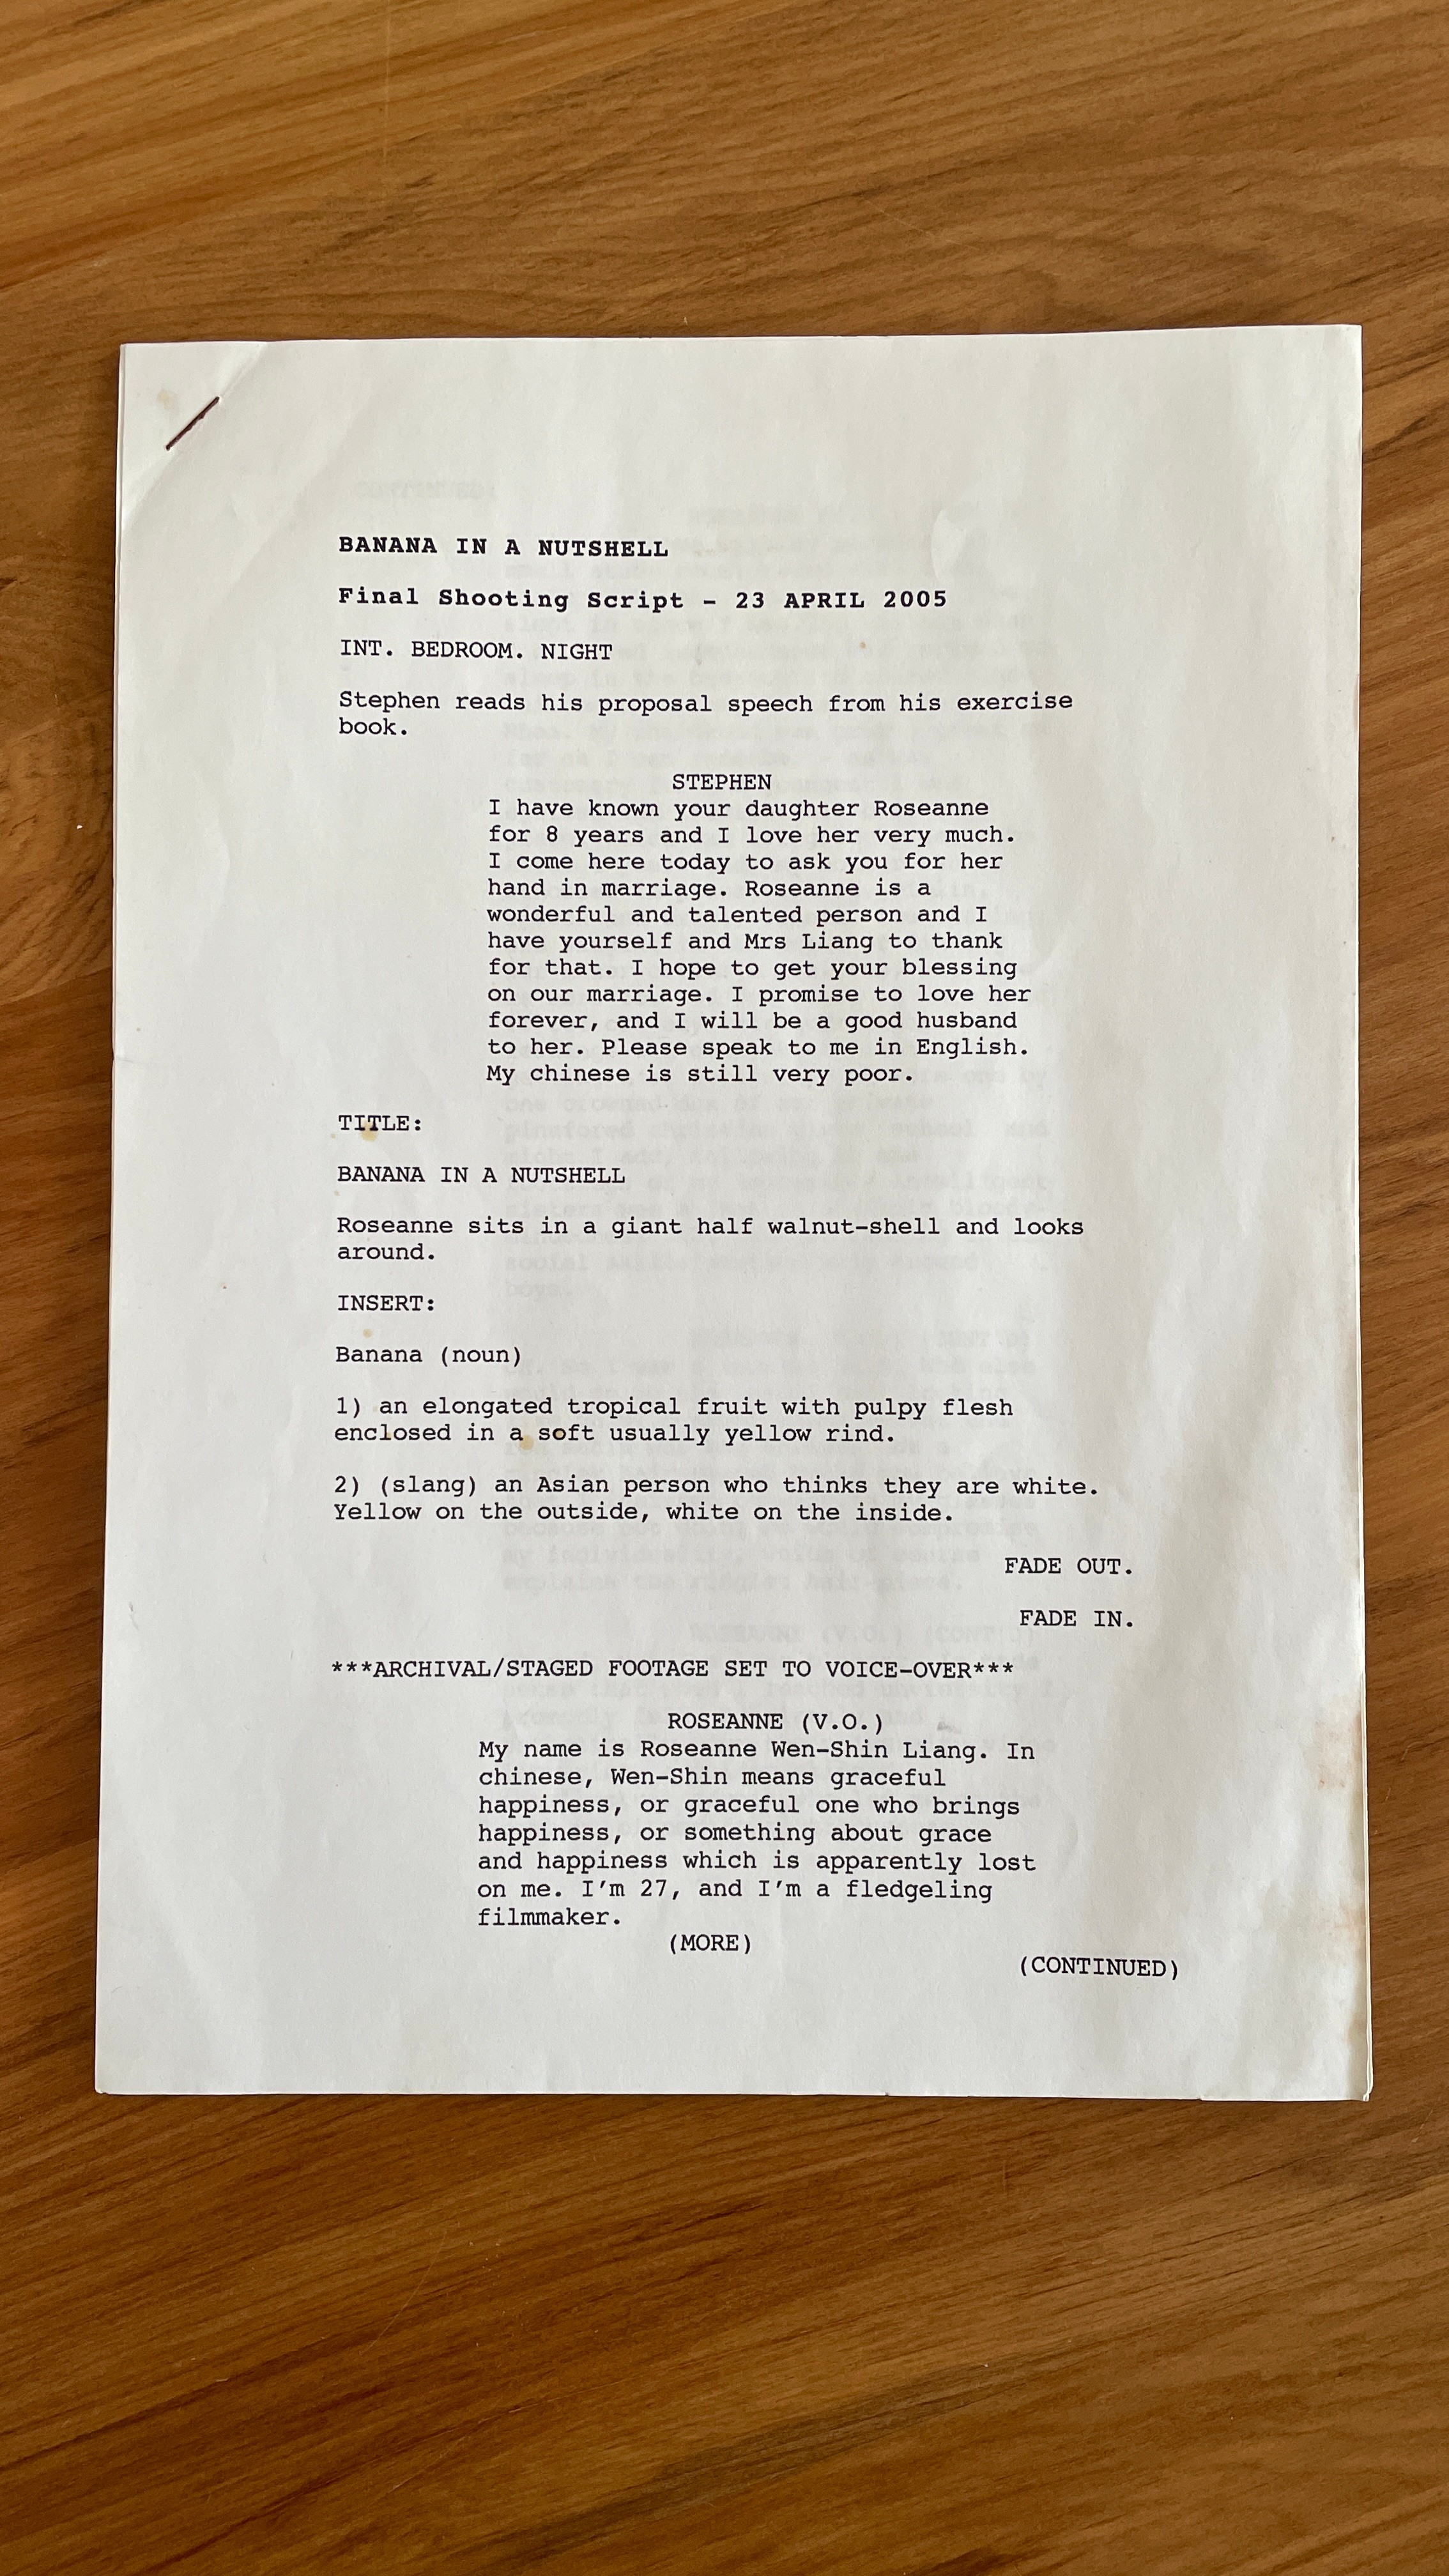 First page of the shooting script for ‘Banana in a Nutshell’, credited to Roseanne Liang.